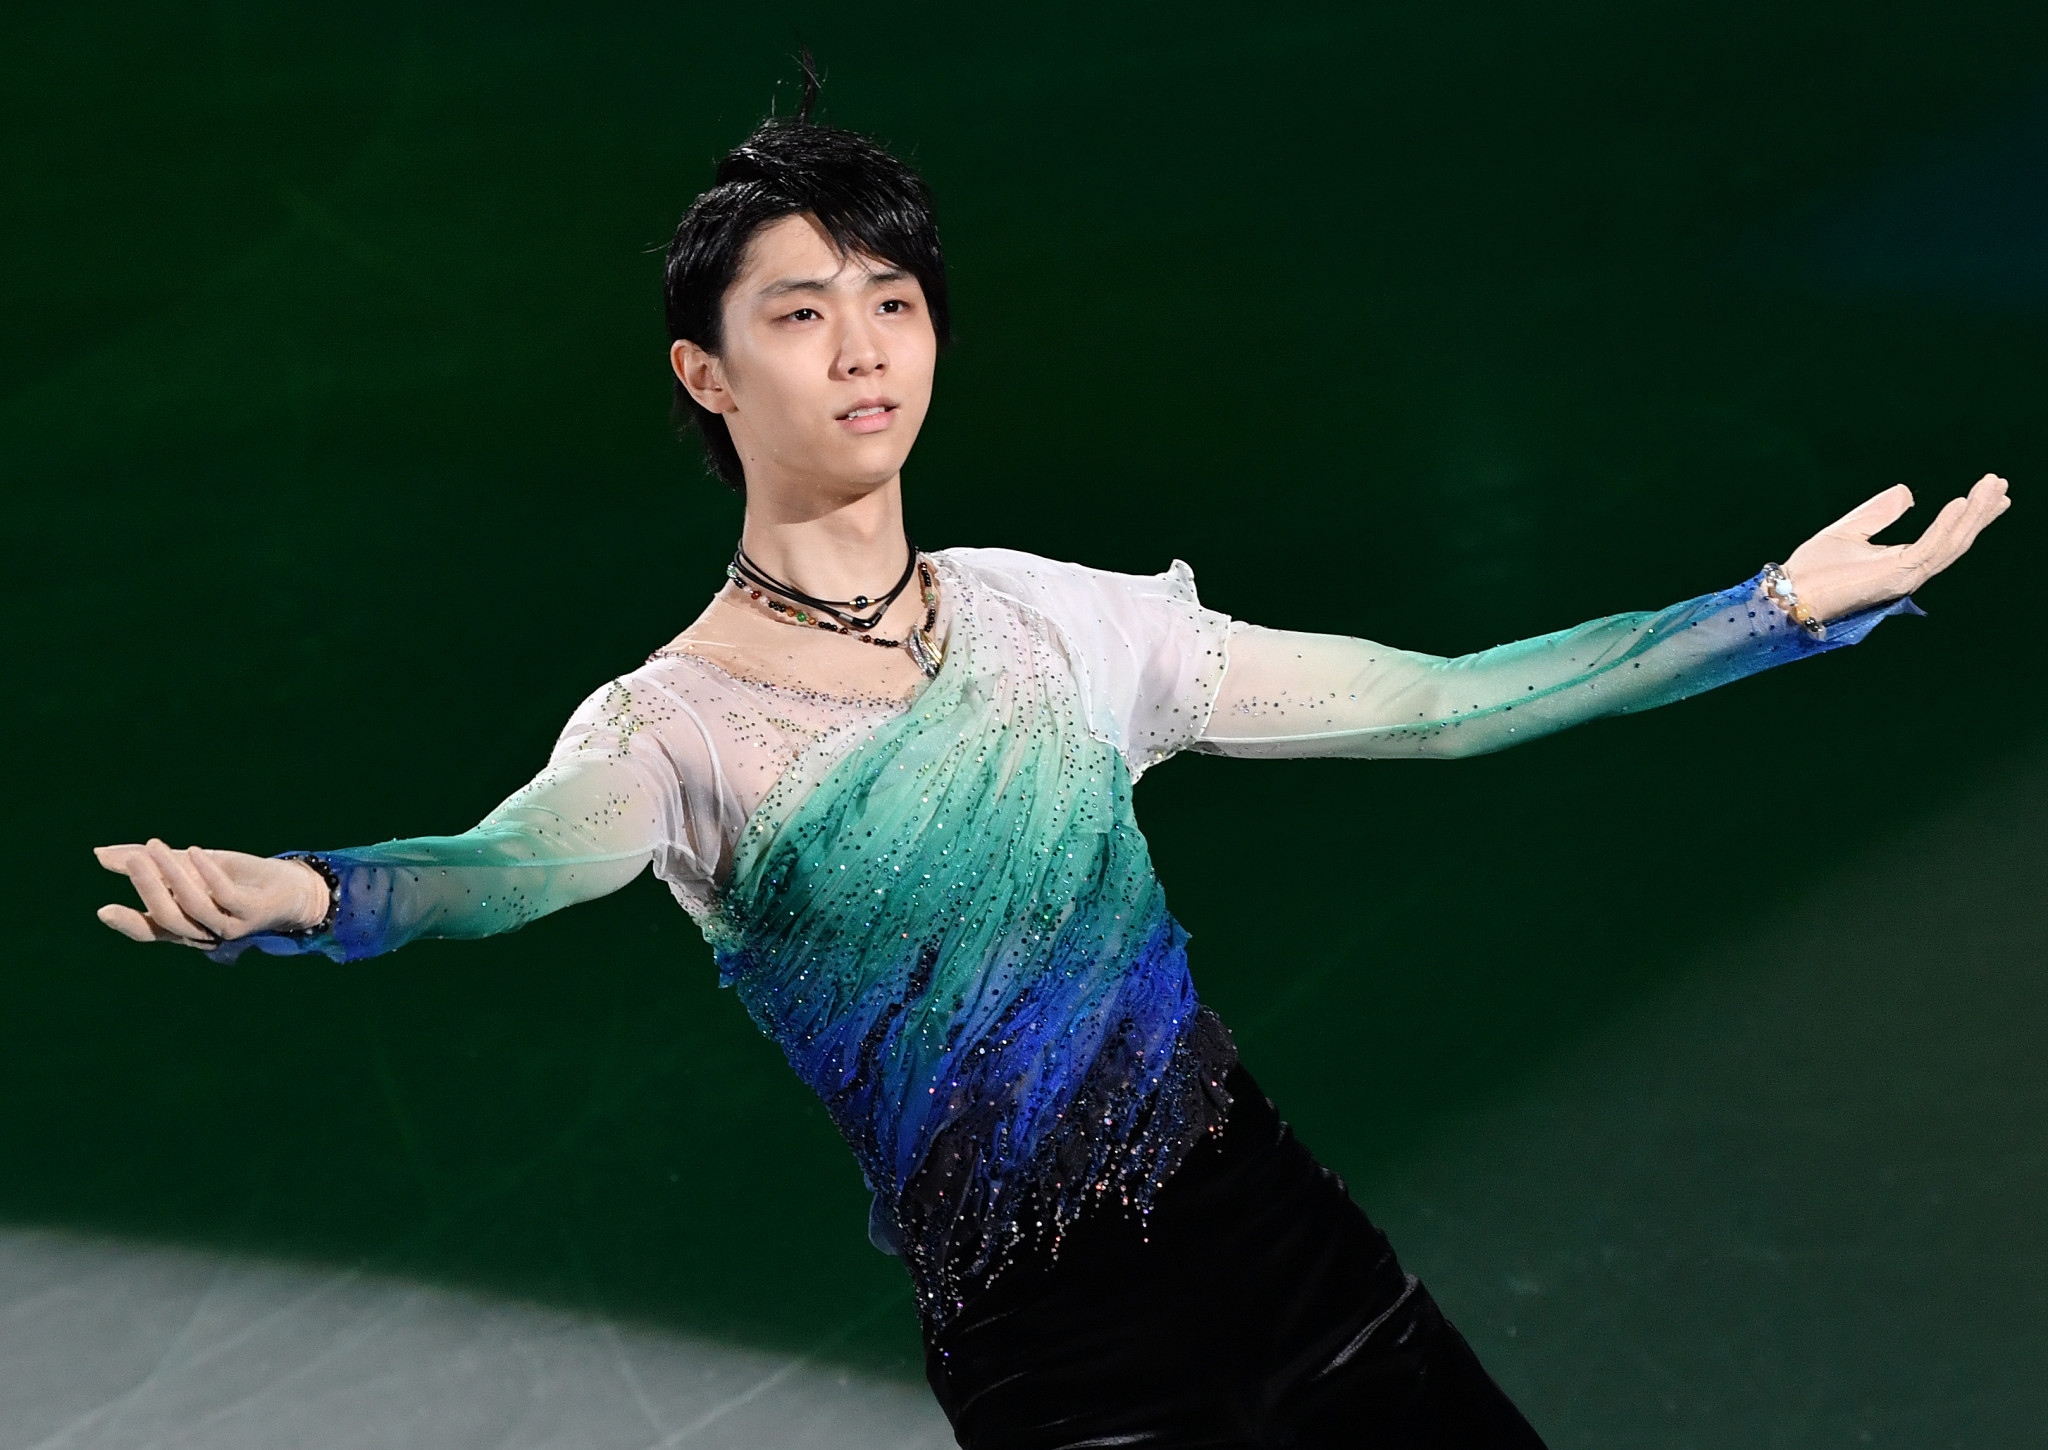 Japanese figure skating star Yuzuru Hanyu received two nominations for the ...